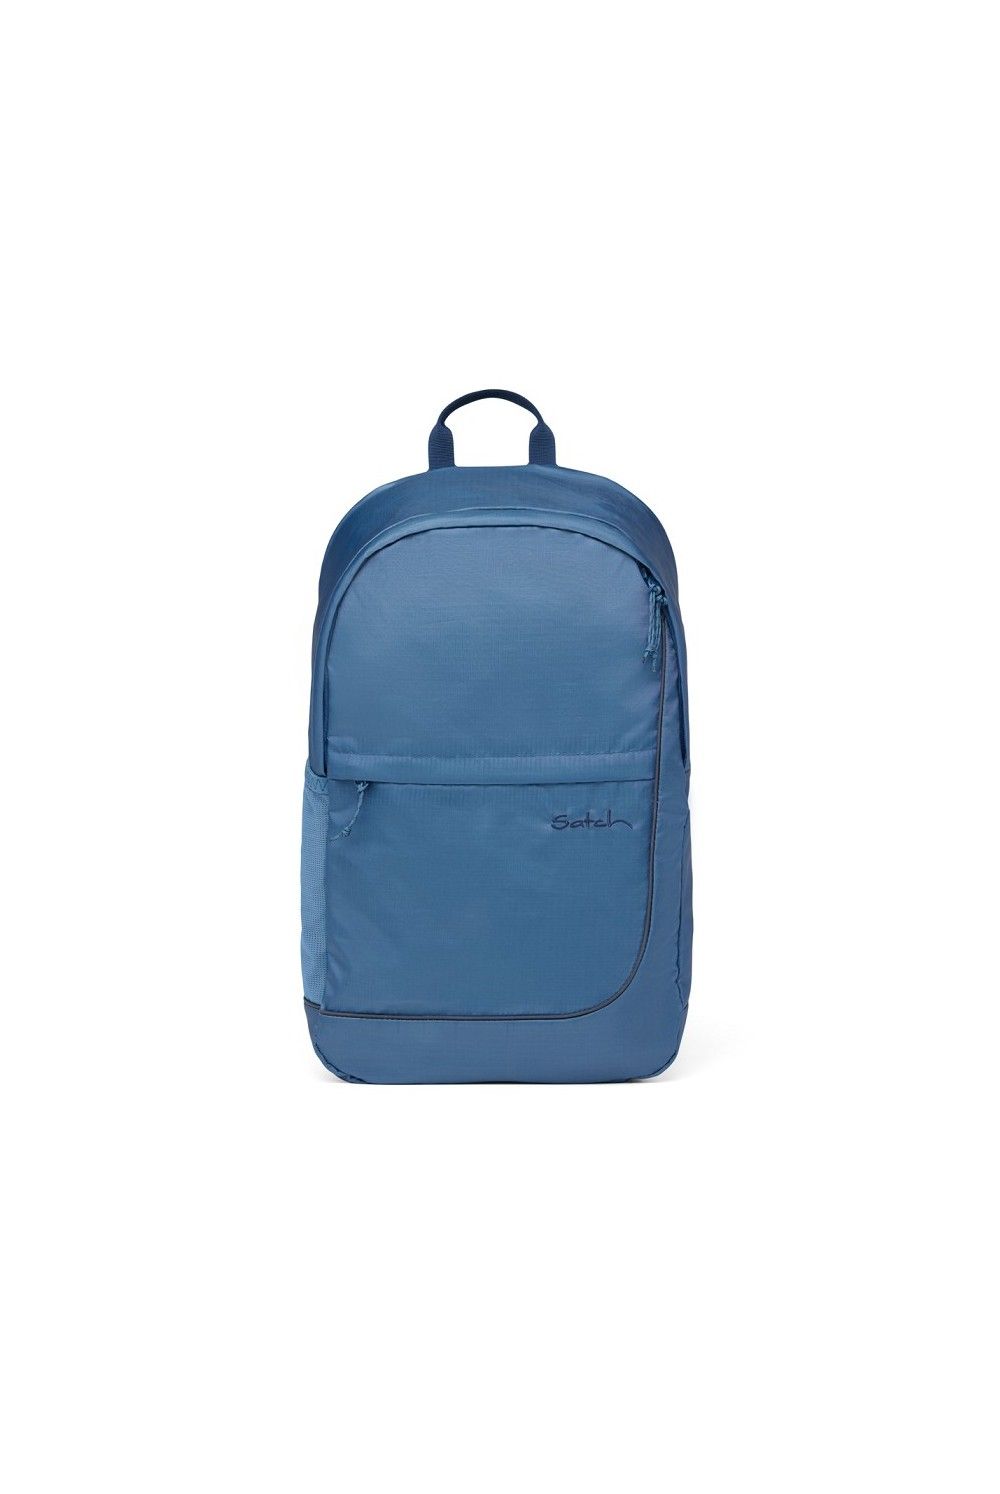 Satch Backpack Fly Ripstop Blue